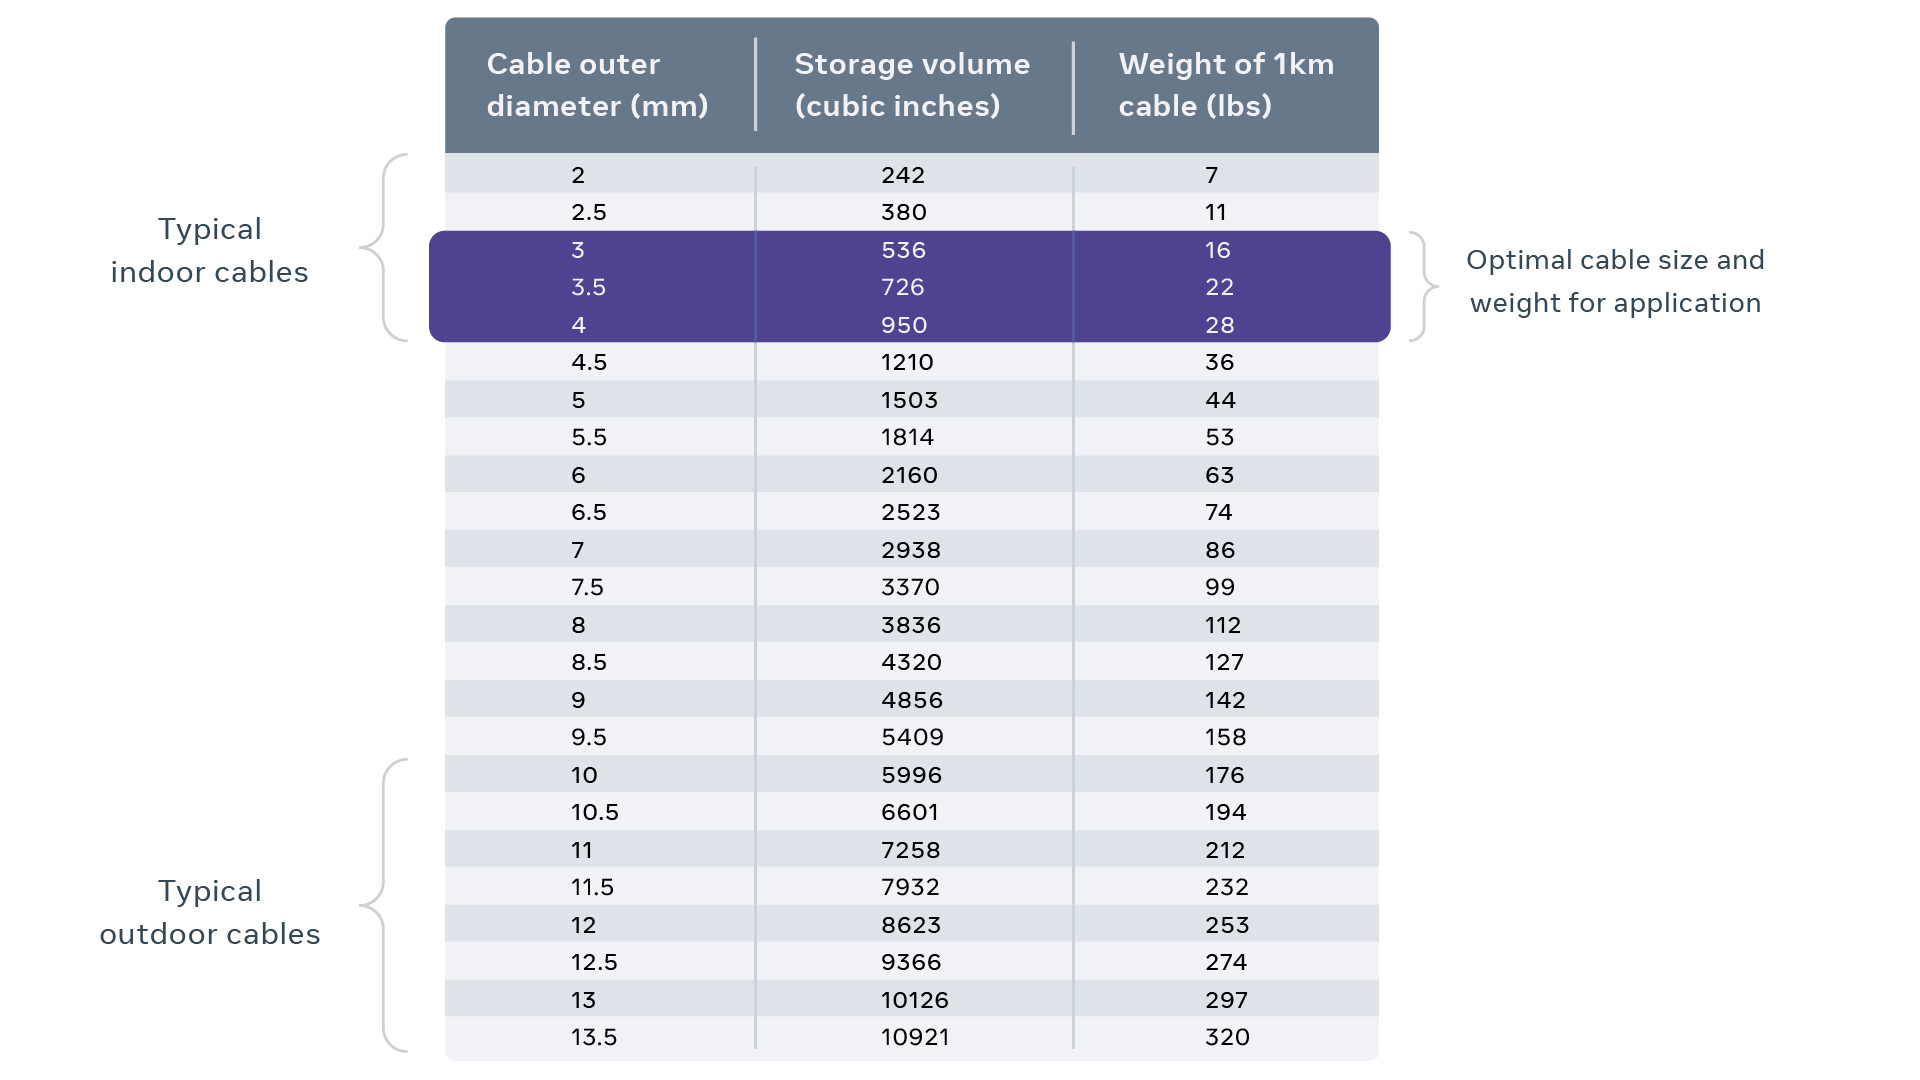 Although outdoor fiber cables are only a few millimeters larger in diameter than typical indoor cables, the size and weight of a kilometer length of outdoor fiber cable is more than 10x greater. 